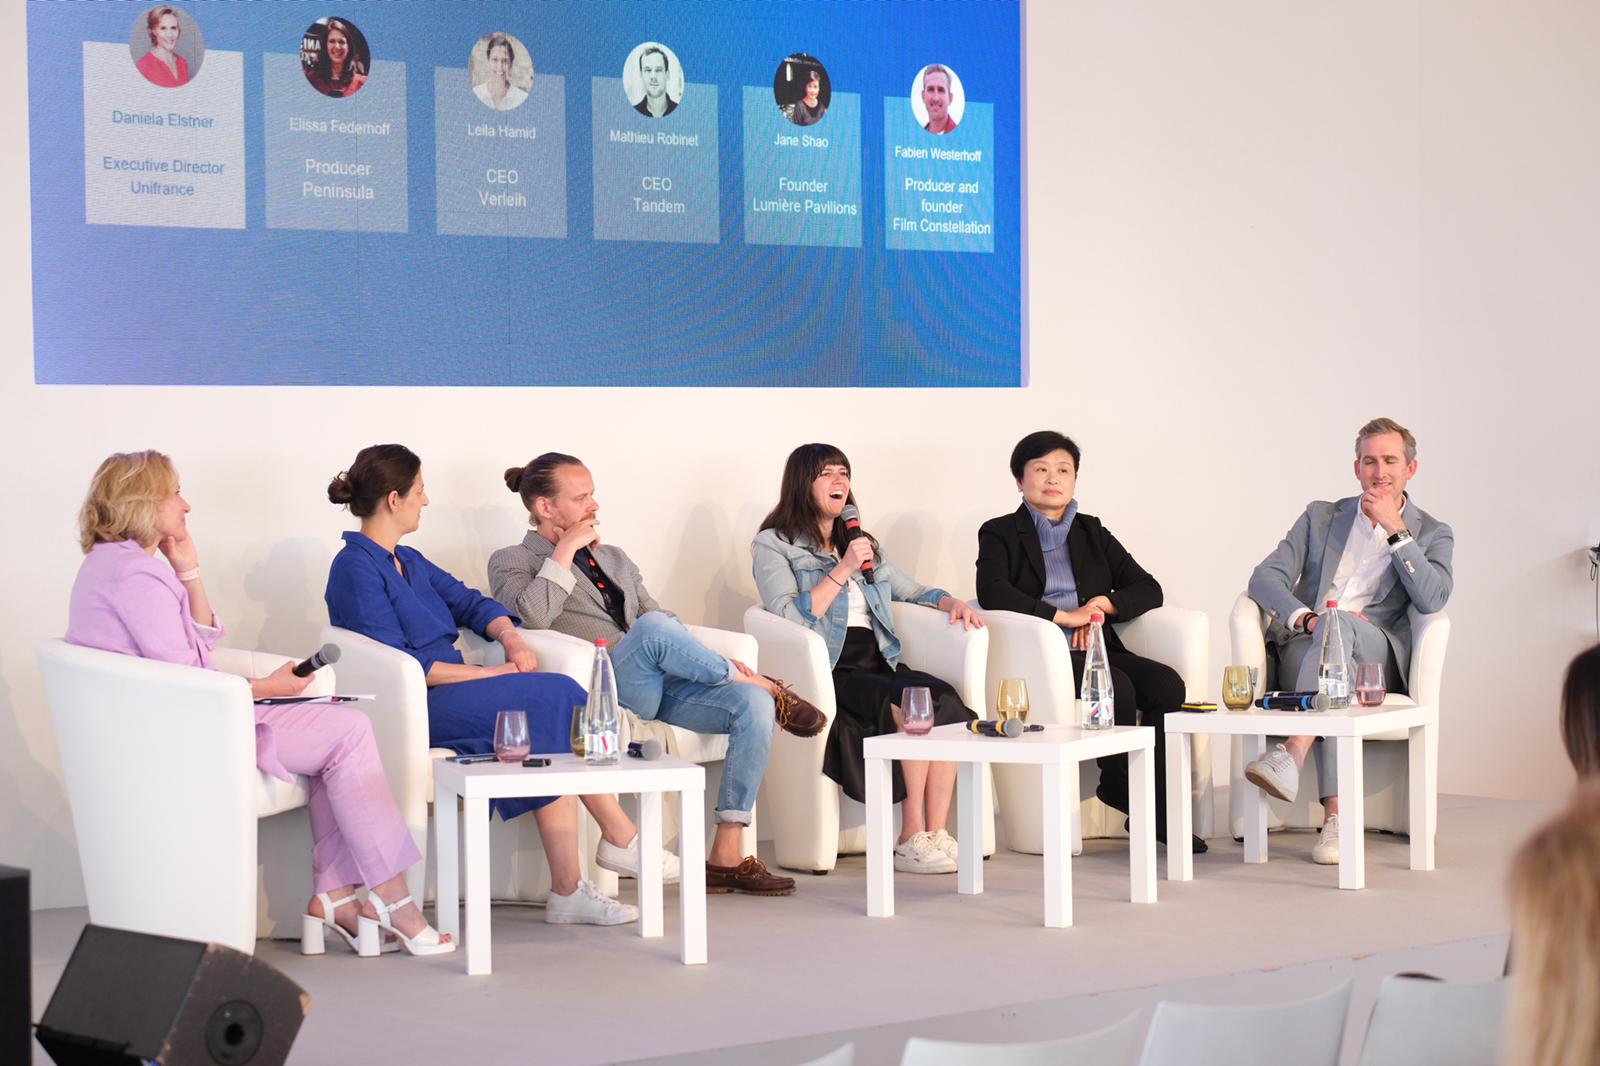 Creativity and innovation in film marketing was the focus of debate in Cannes